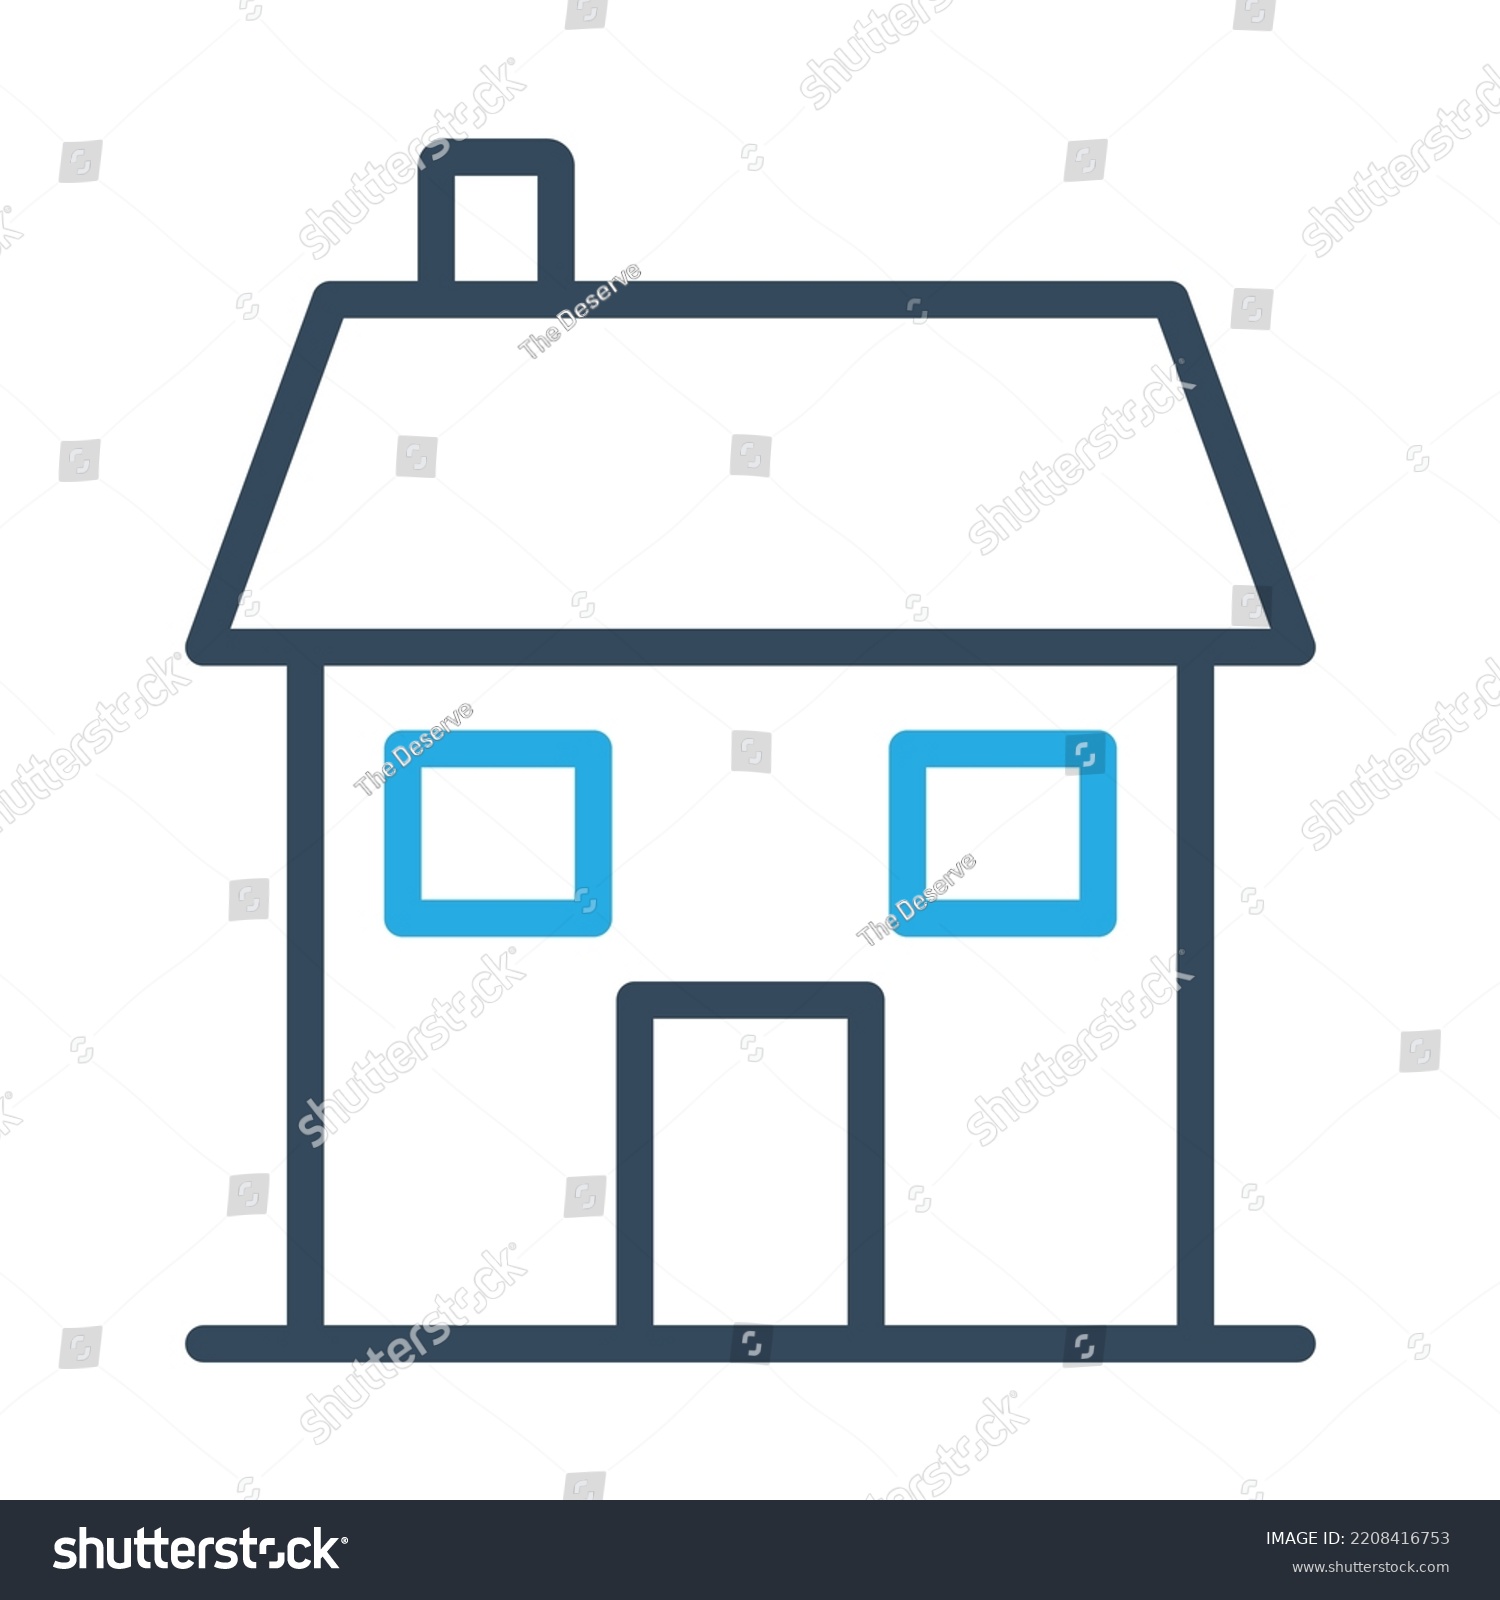 SVG of House Vector Icon which is suitable for commercial work and easily modify or edit it

 svg